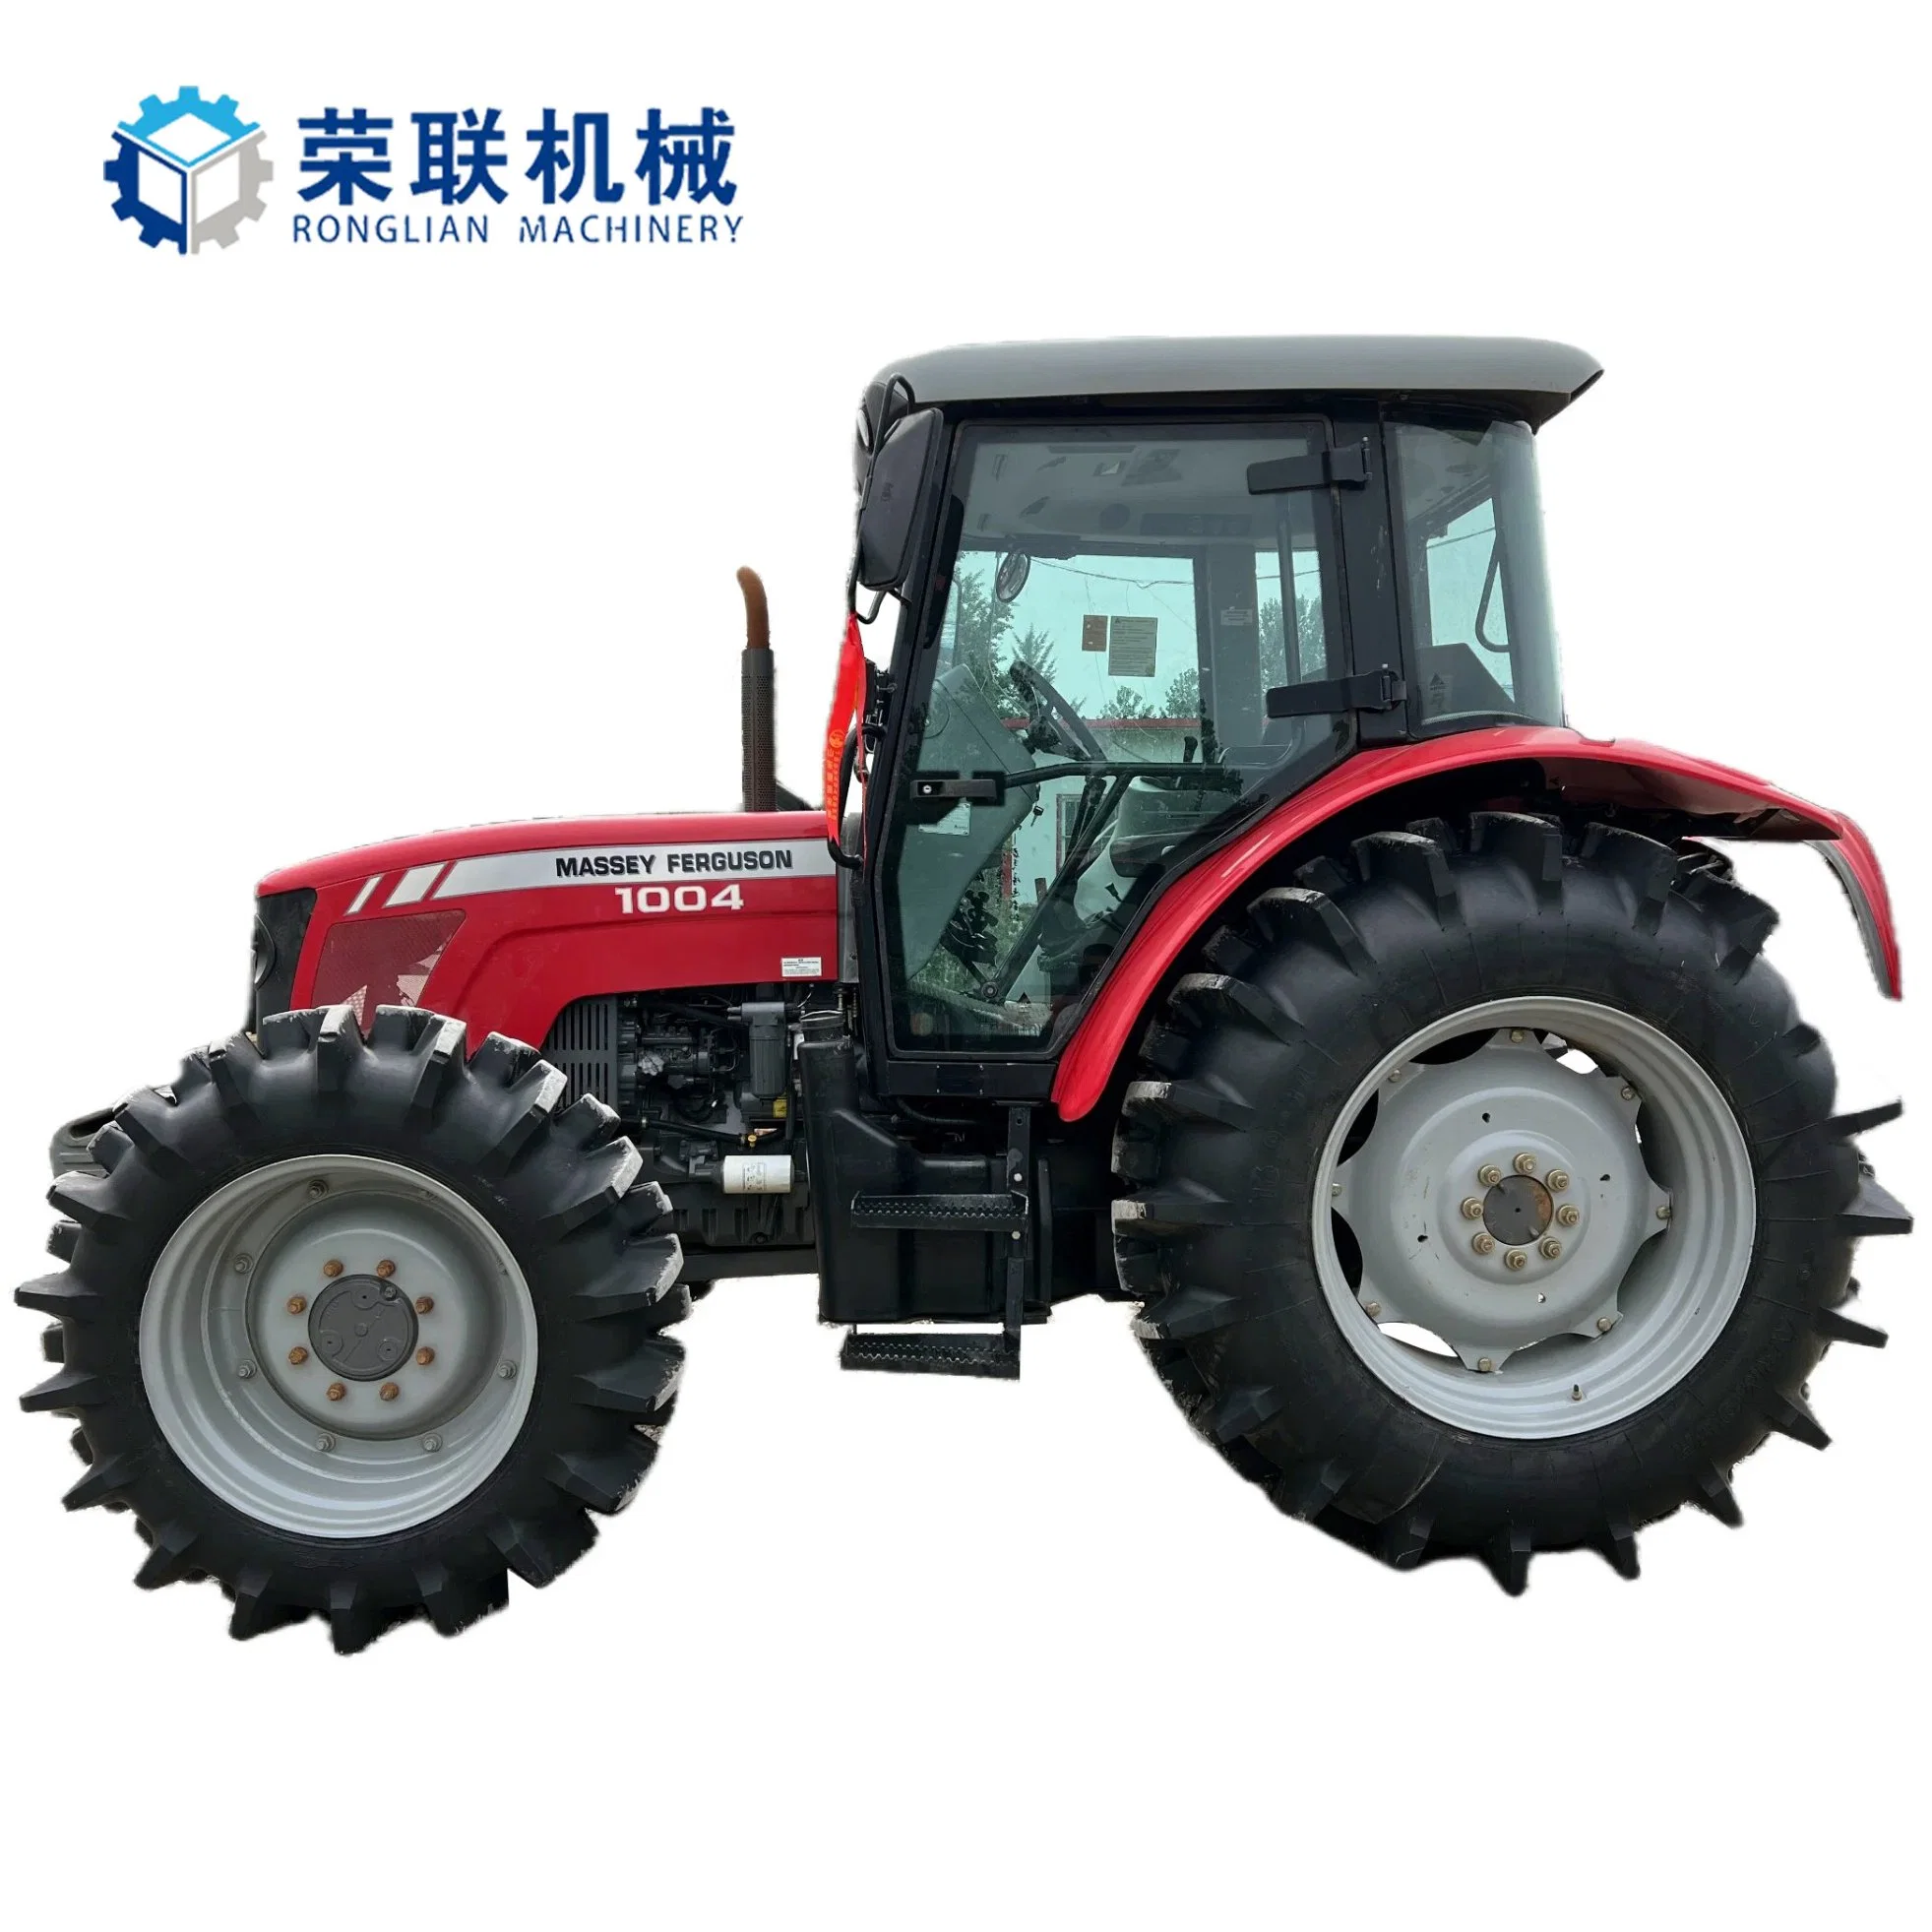 Farm Tractor Massey Ferguson Mf1004 with Air Conditioner Agricultual Machinery in Europe